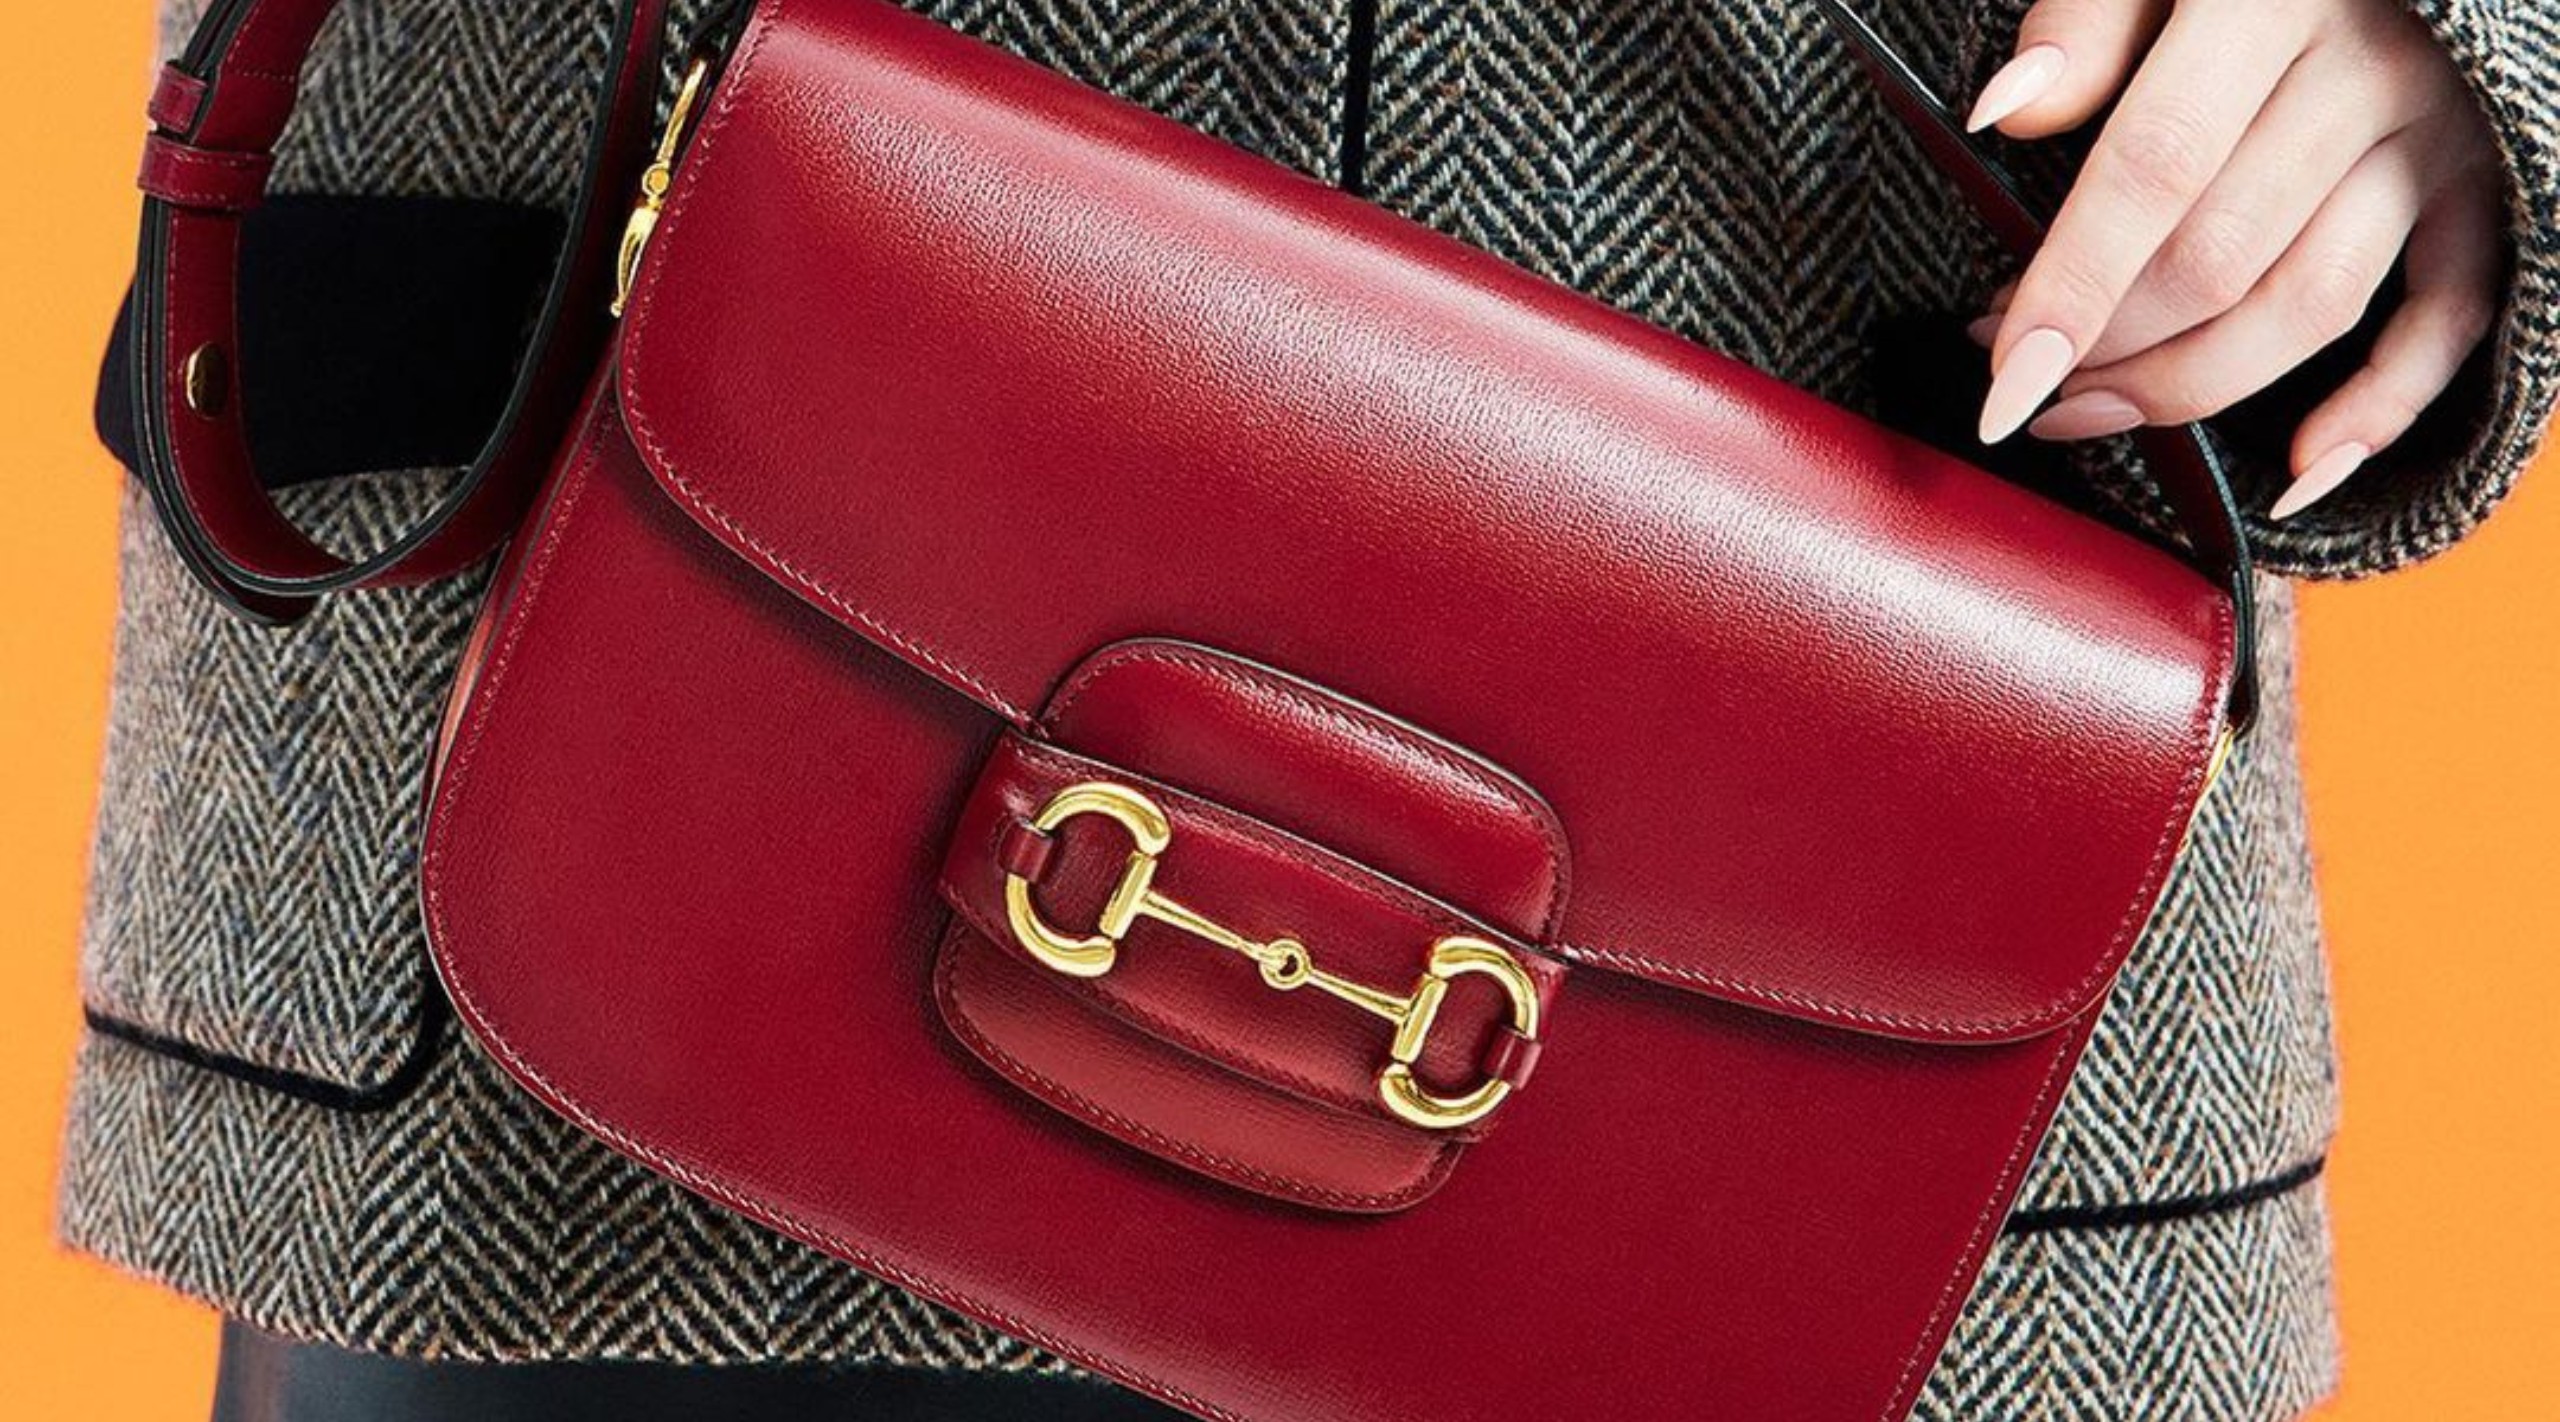 Gucci's iconic Horsebit 1955 bags seamlessly blend history with luxury